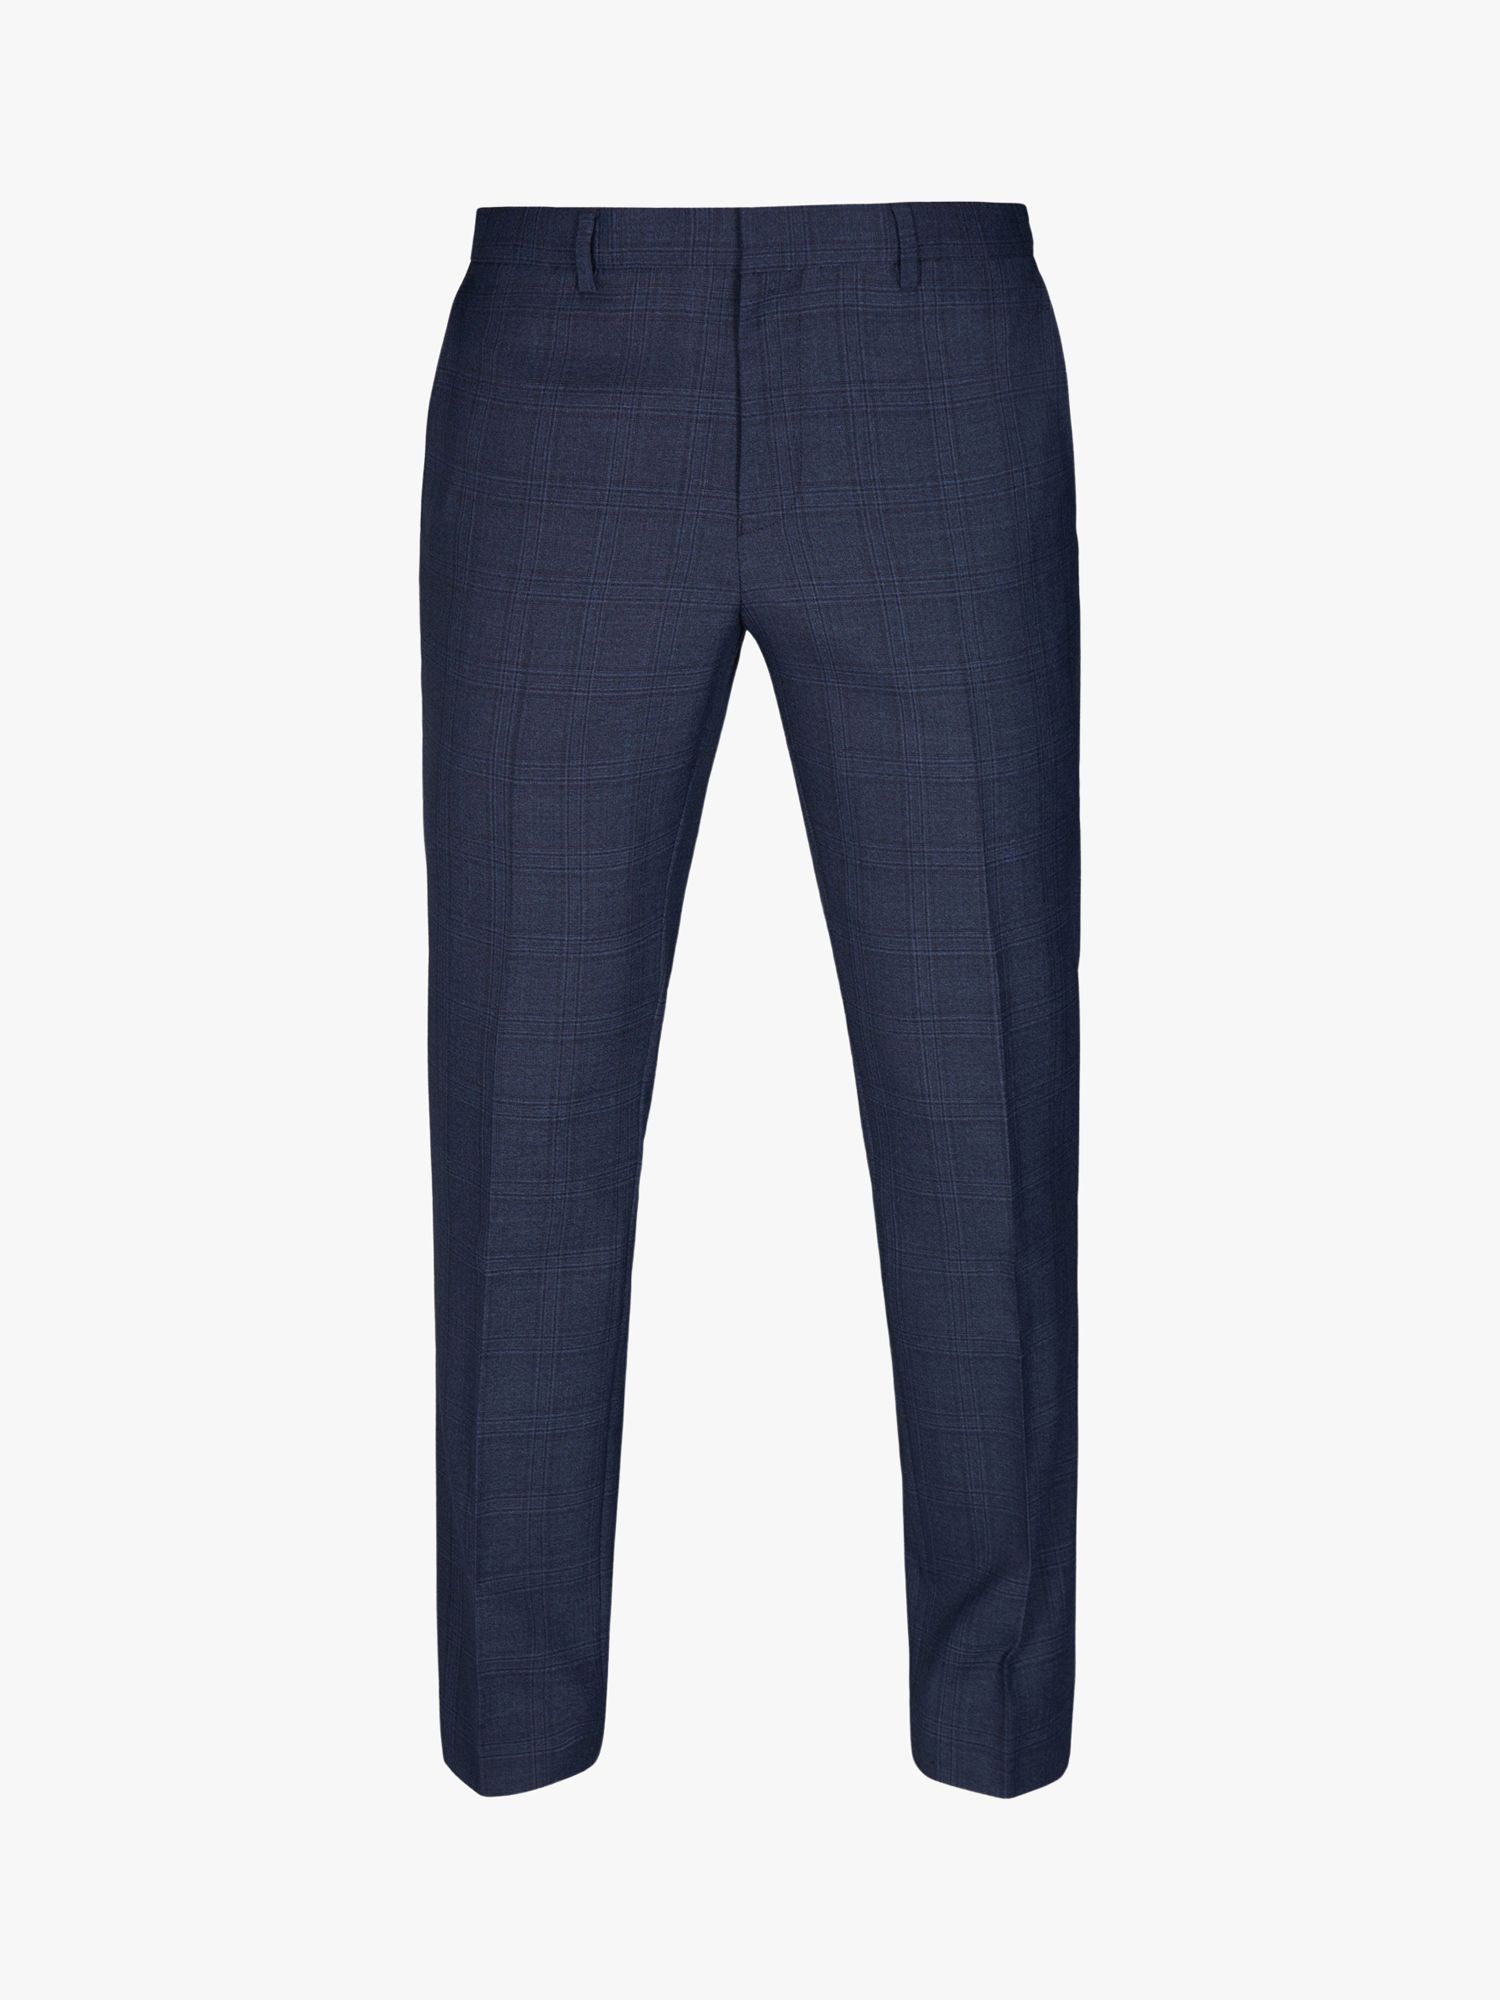 Ted Baker Ara Textured Check Wool Blend Suit Trousers, Navy, 32S